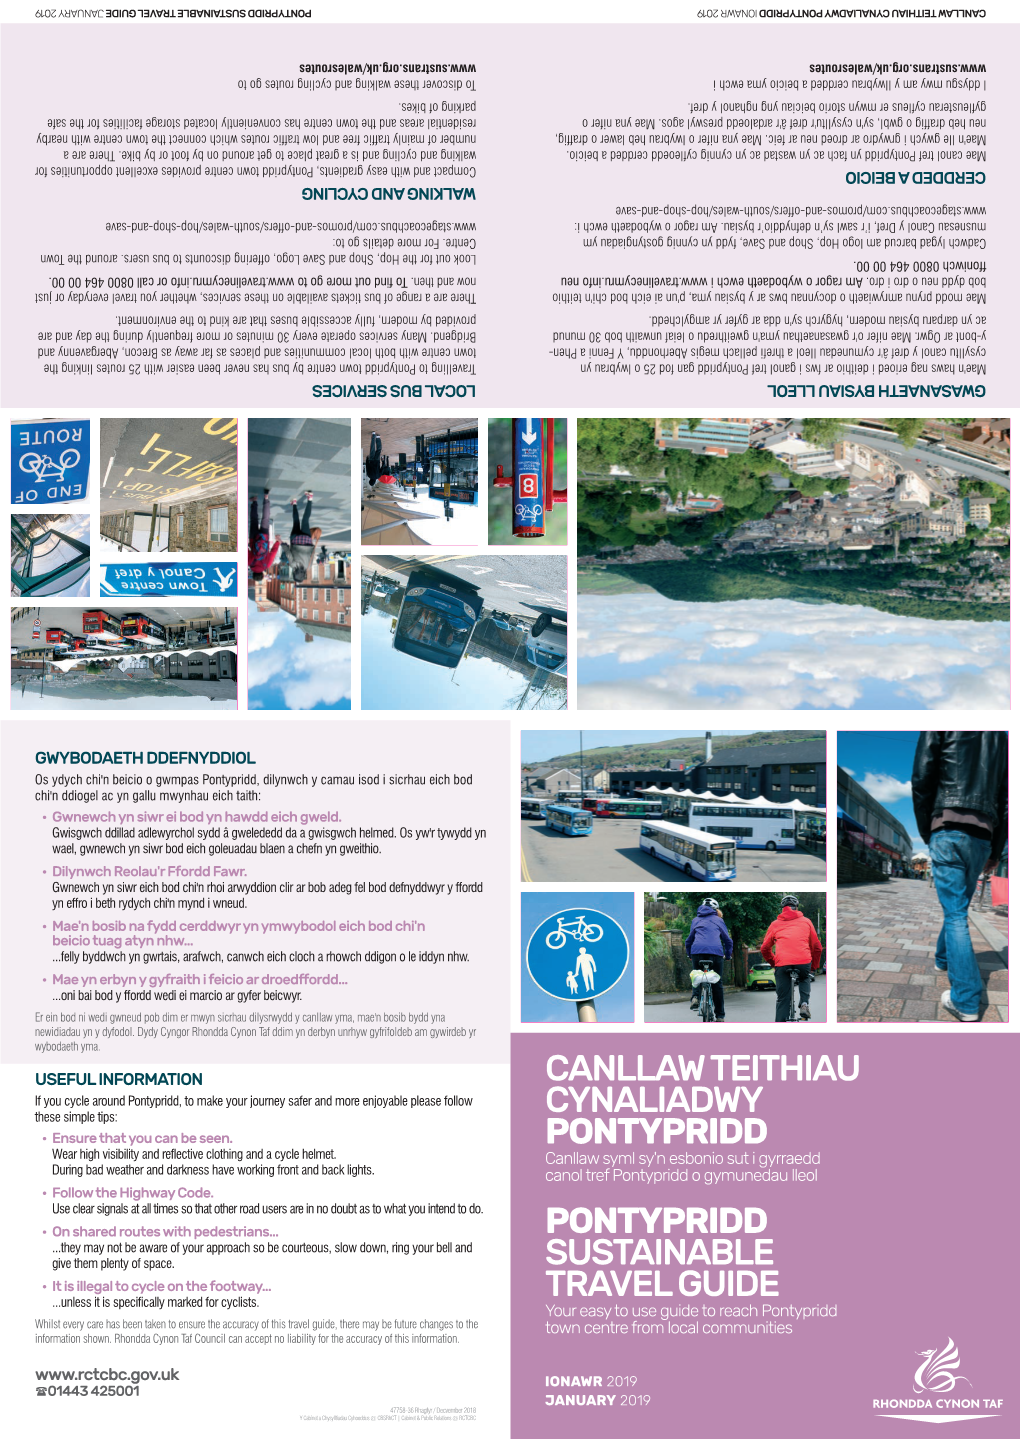 46436-36 Pontypridd Sustainable Transport Guide.Qxp Layout 1 29/11/2018 10:51 Page 1